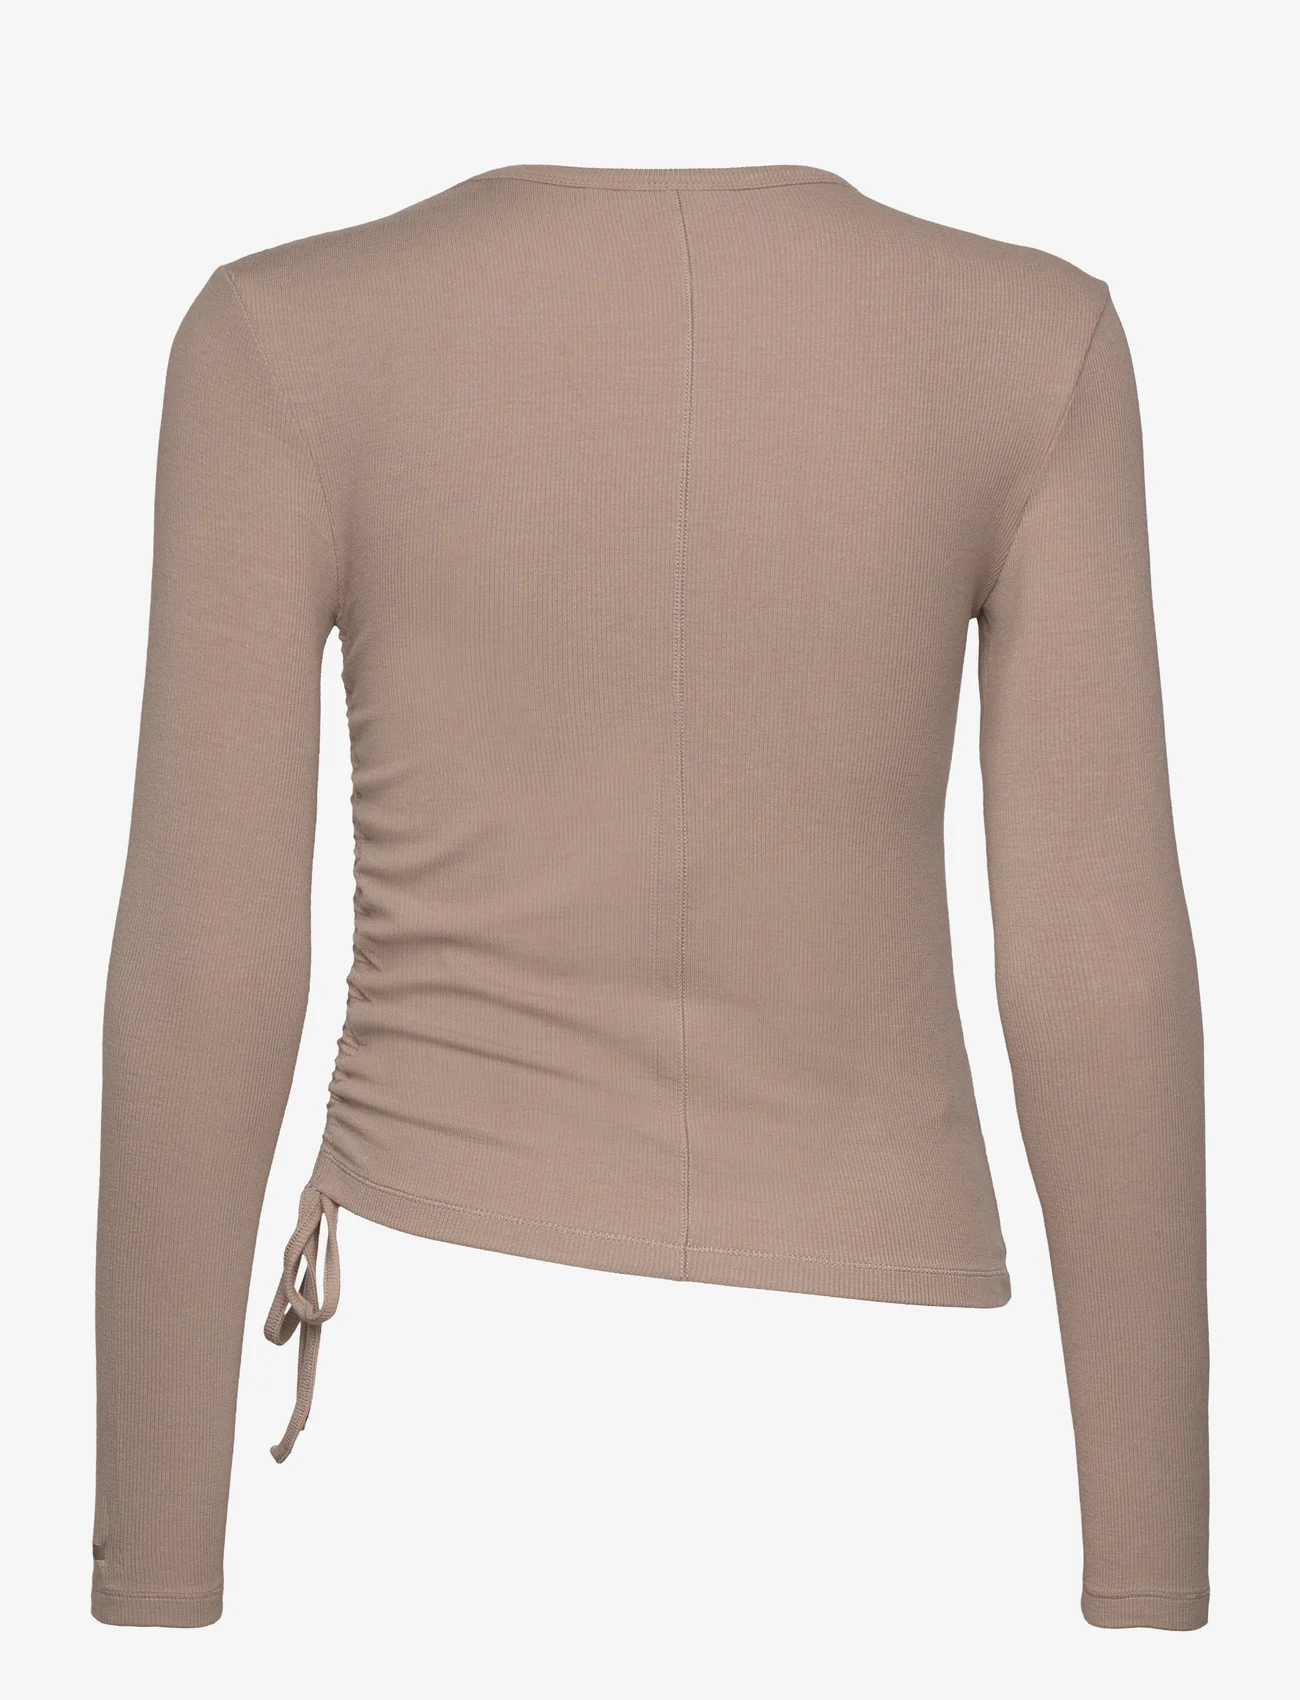 Calvin Klein - MODAL RIB GATHERED LS TEE - long-sleeved tops - neutral taupe - 1